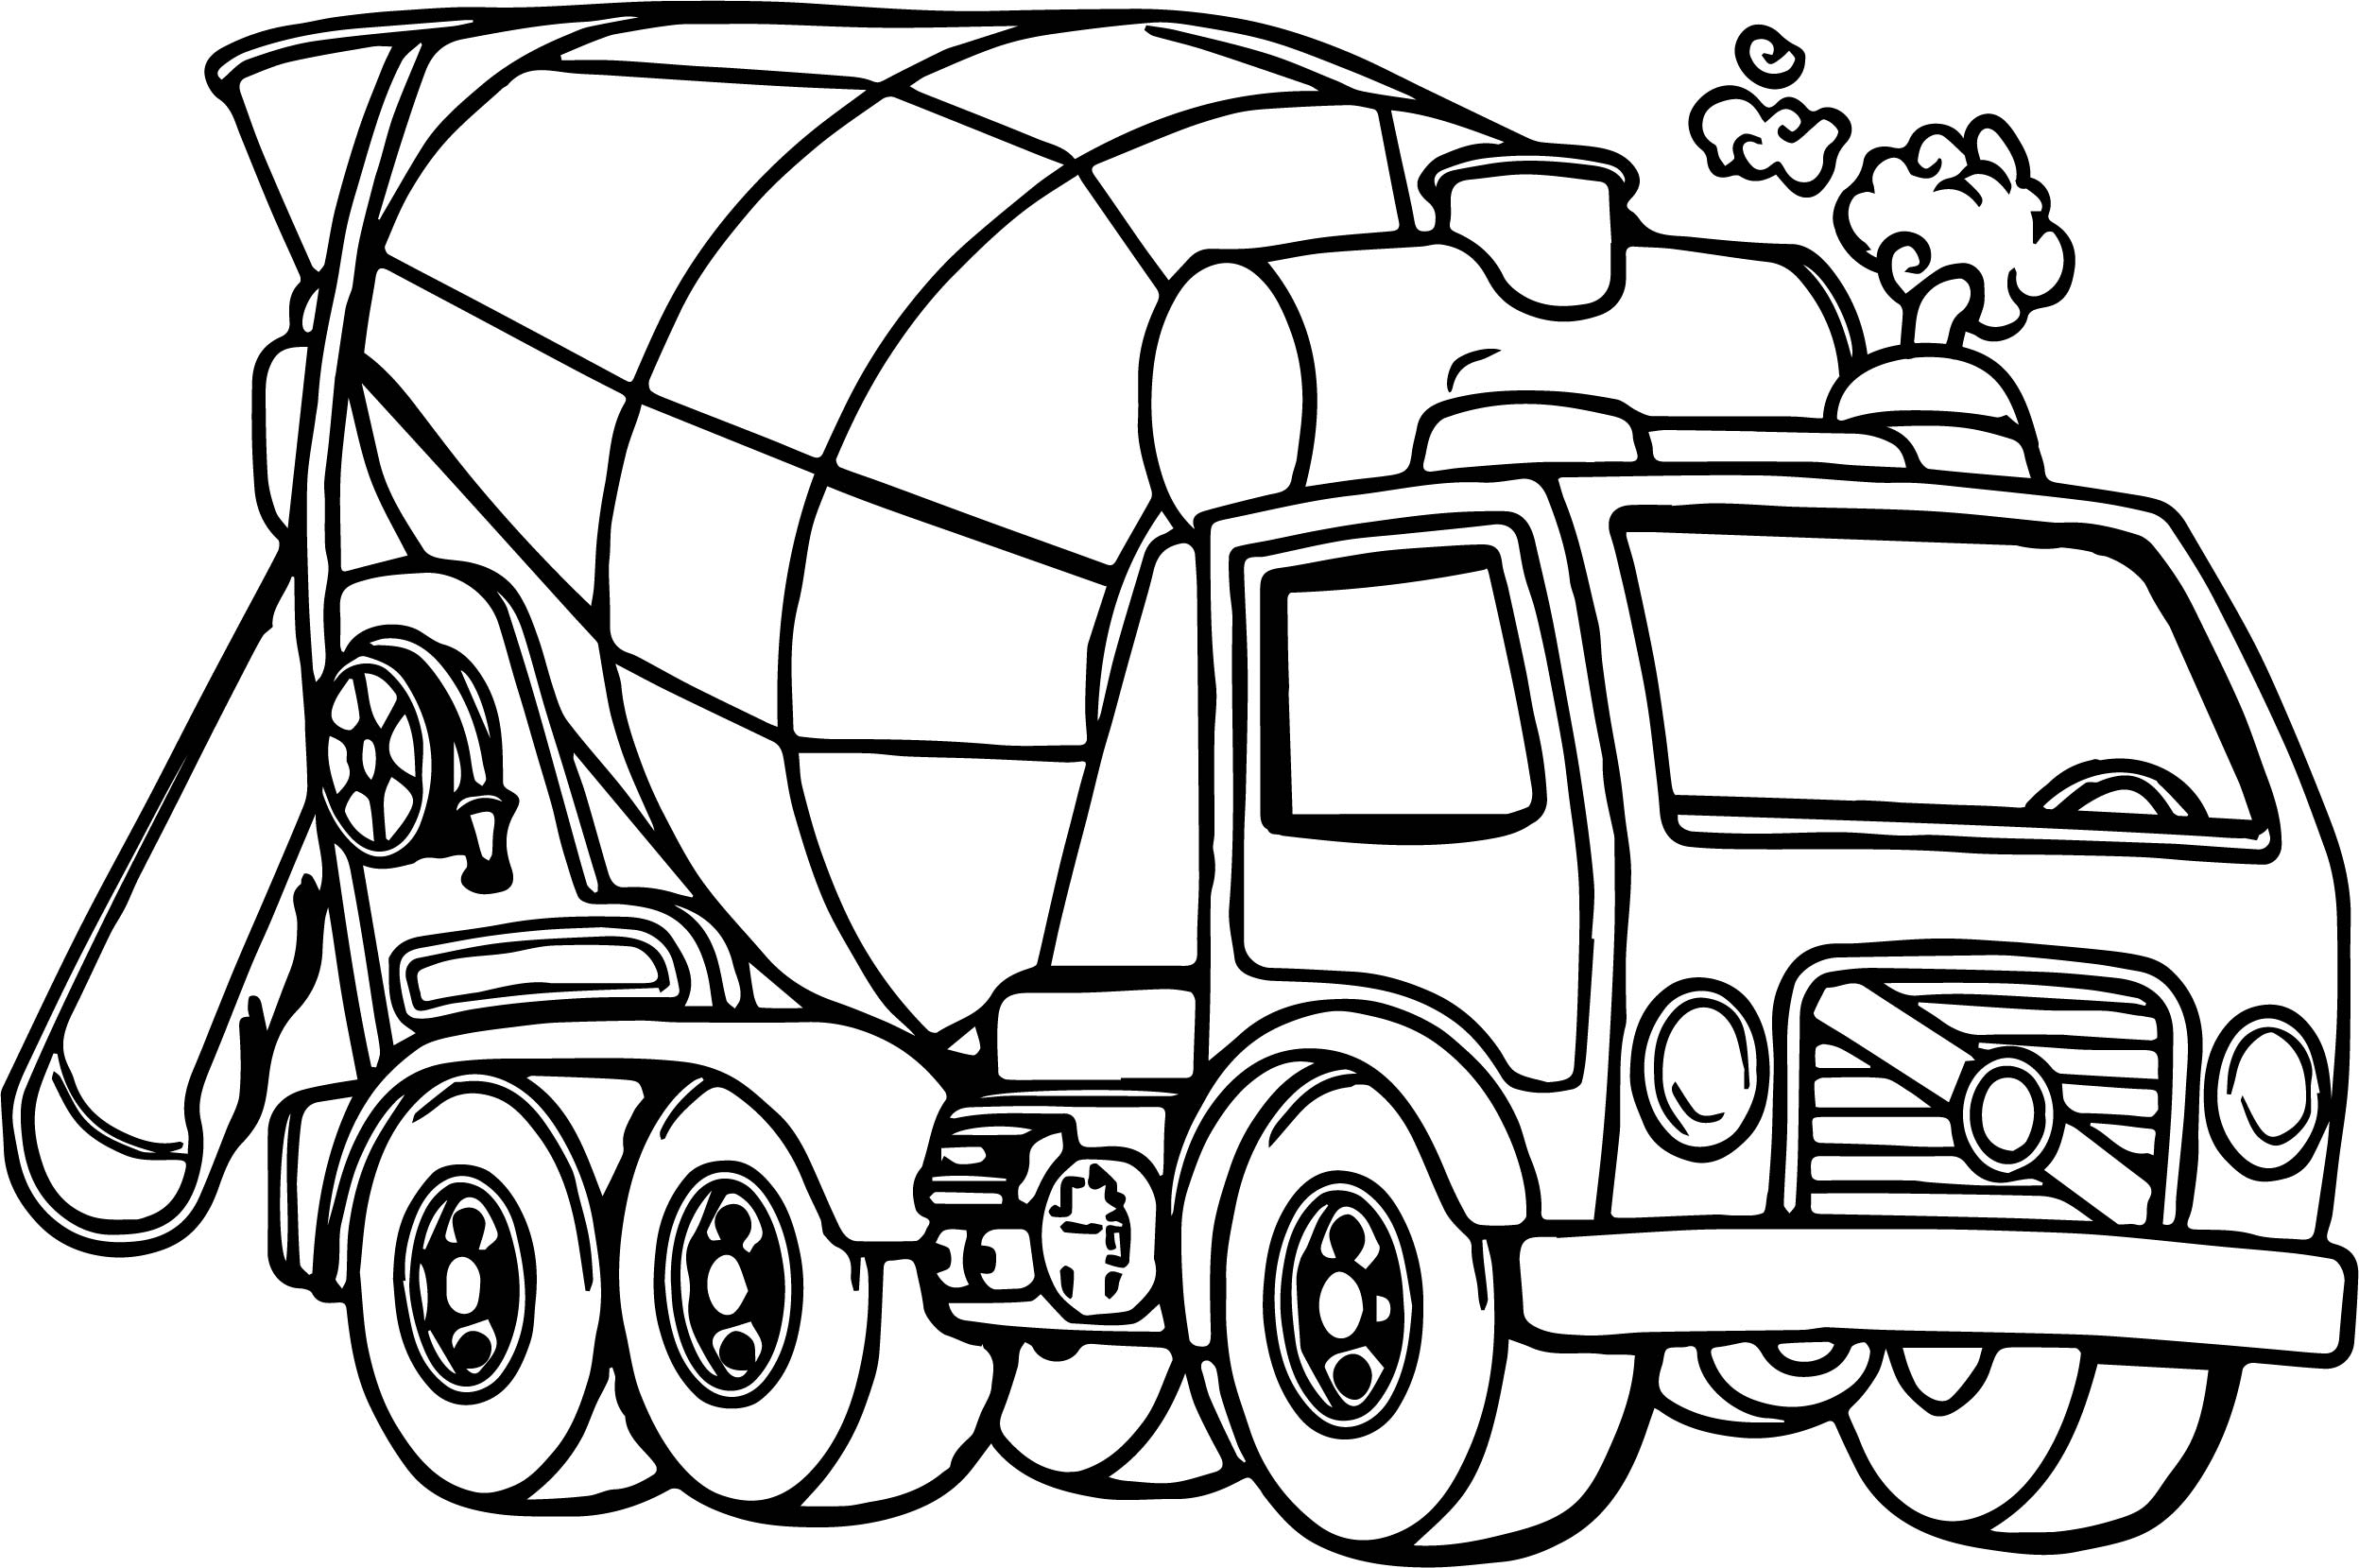 Truck Coloring Pages For Adults at GetColorings.com | Free printable